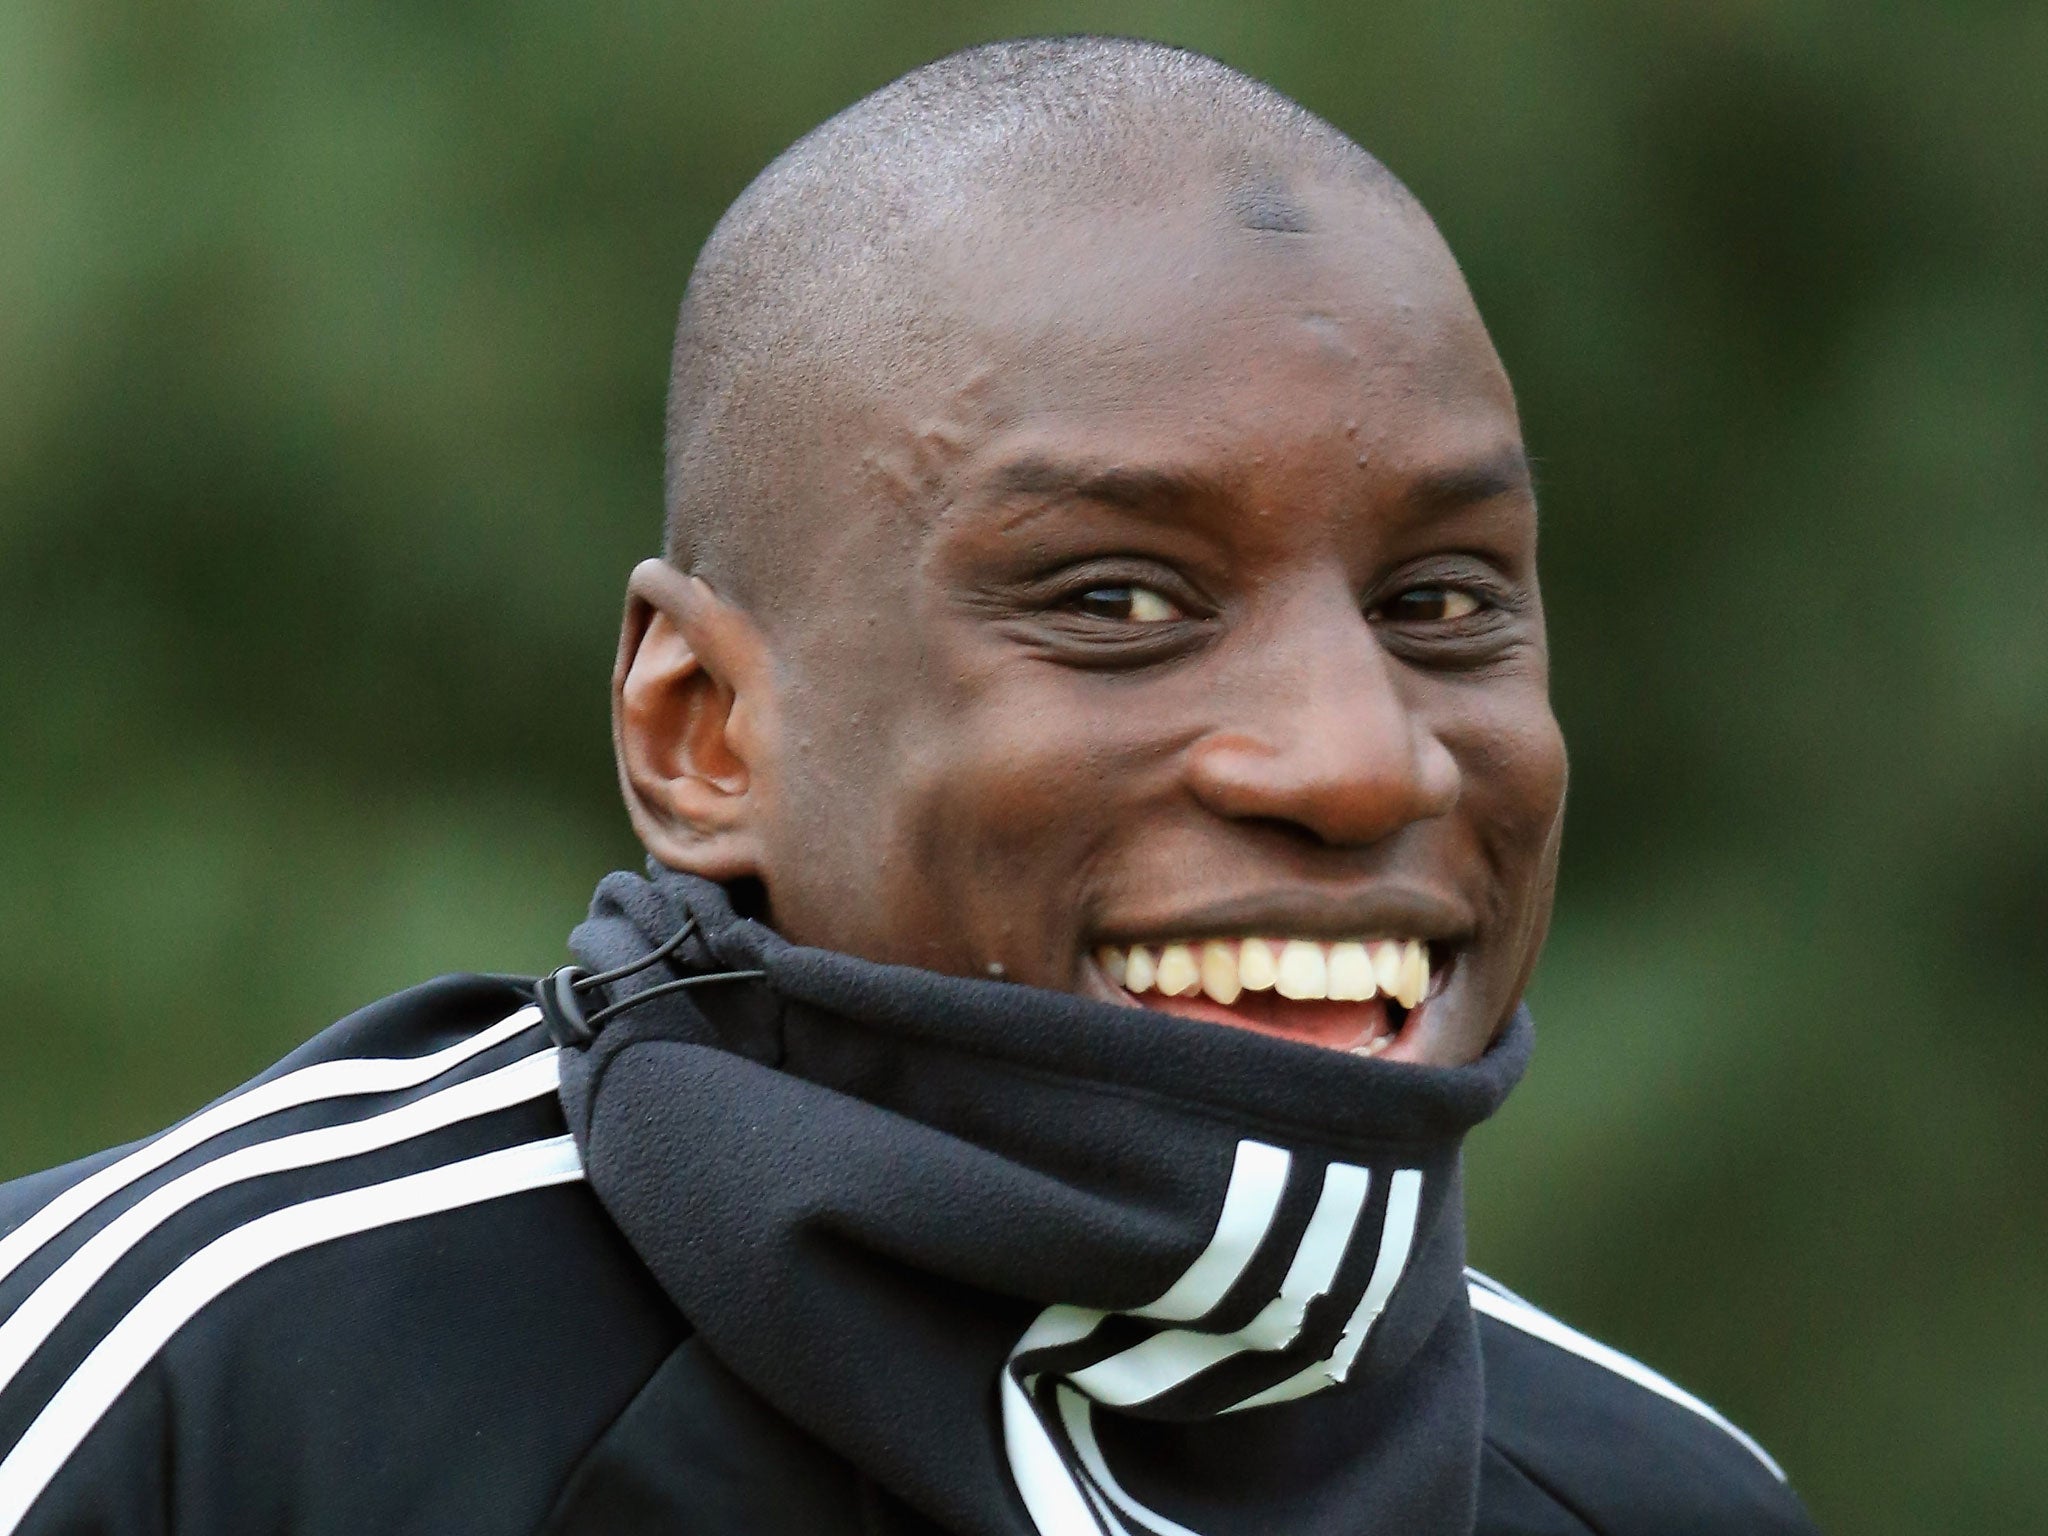 It is now Demba Ba's 'time' at Chelsea, according to Jose Mourinho